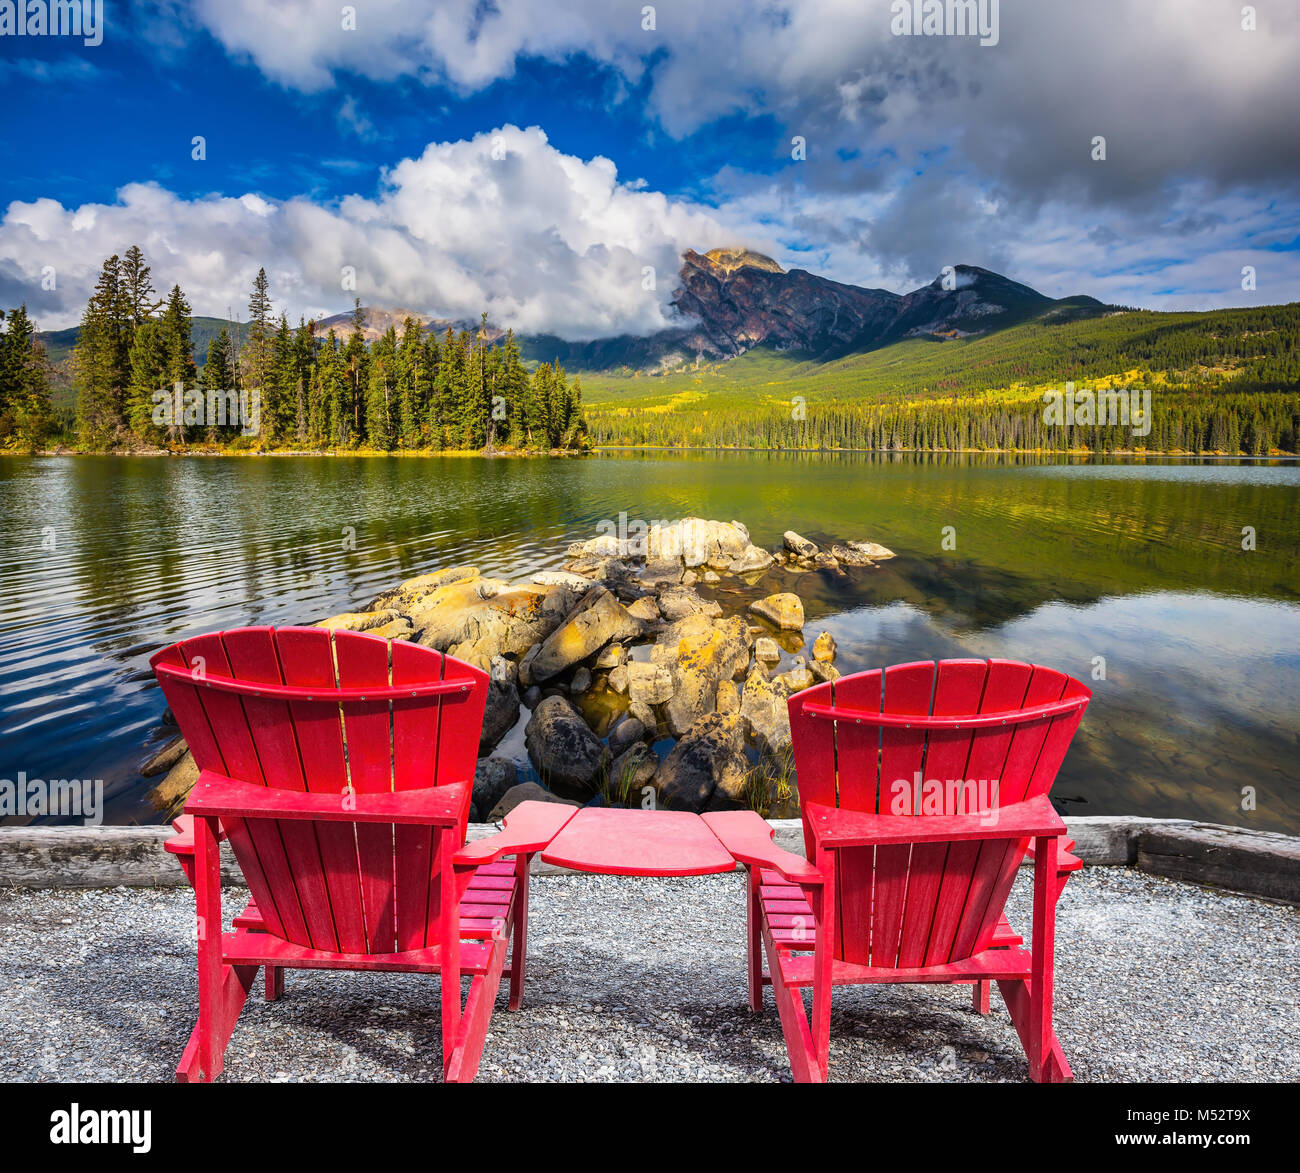 Two red chaise lounges for the tourists Stock Photo